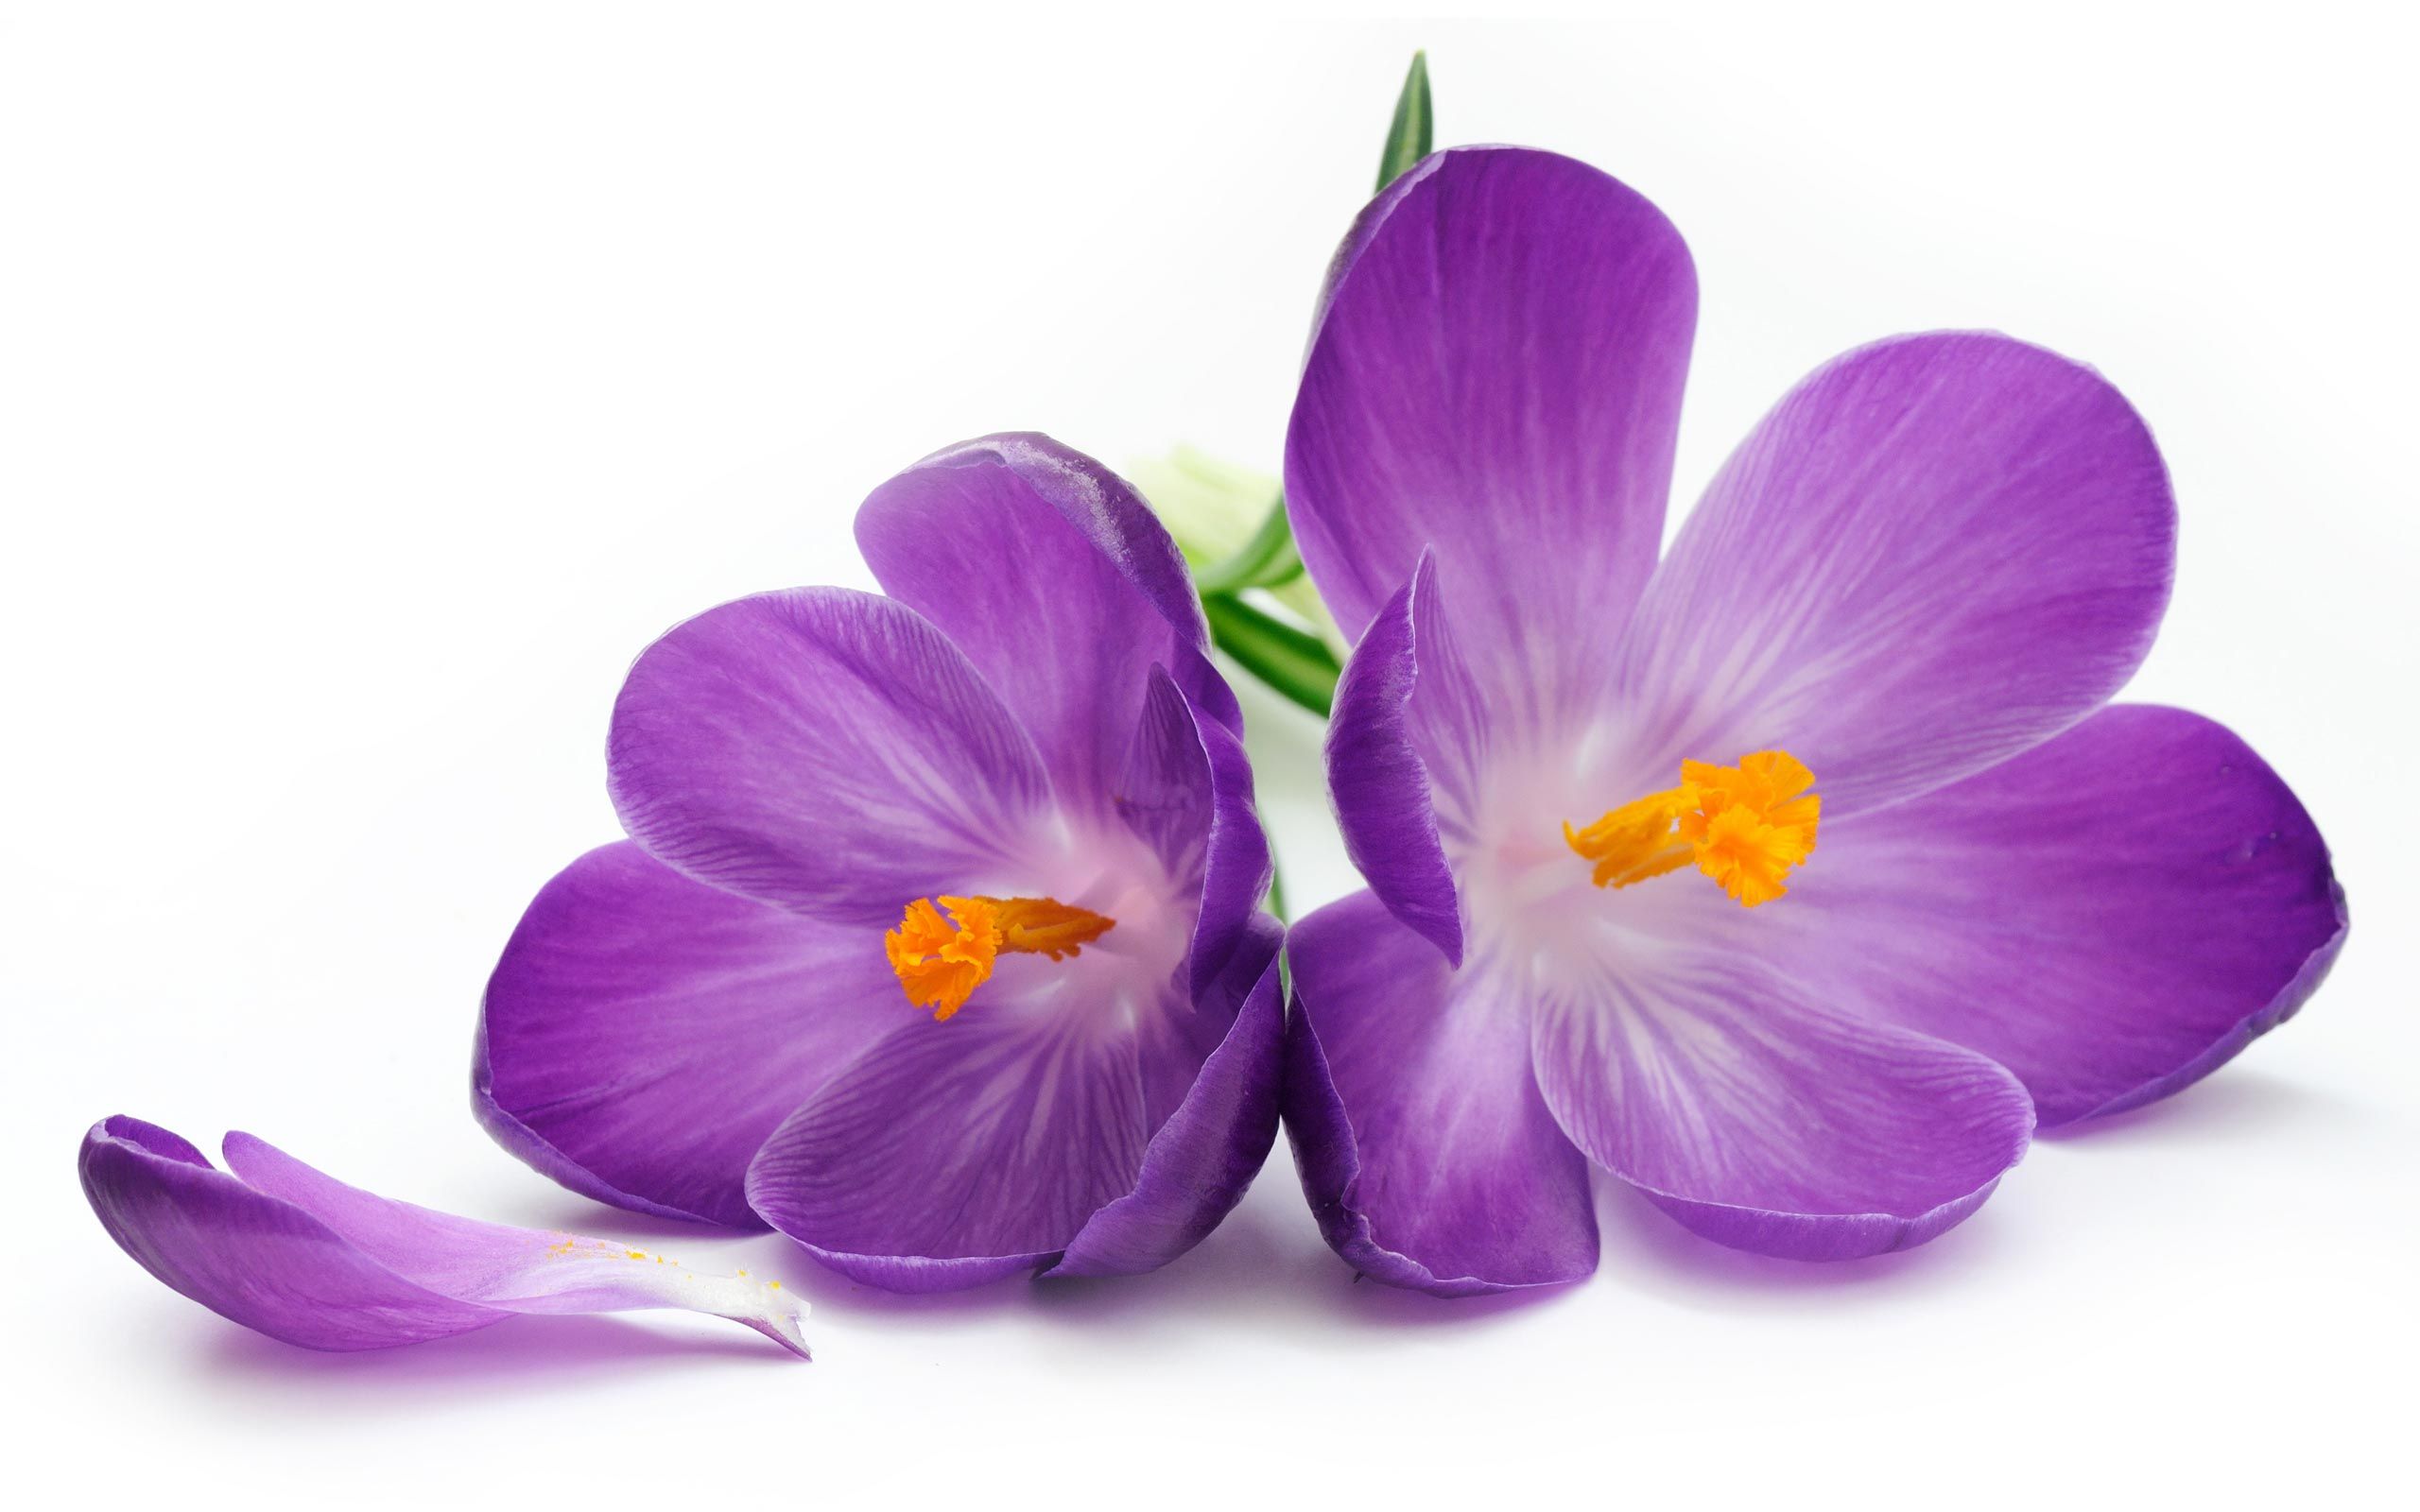 purple flowers - Google Search | Bring the flowers indoors ...